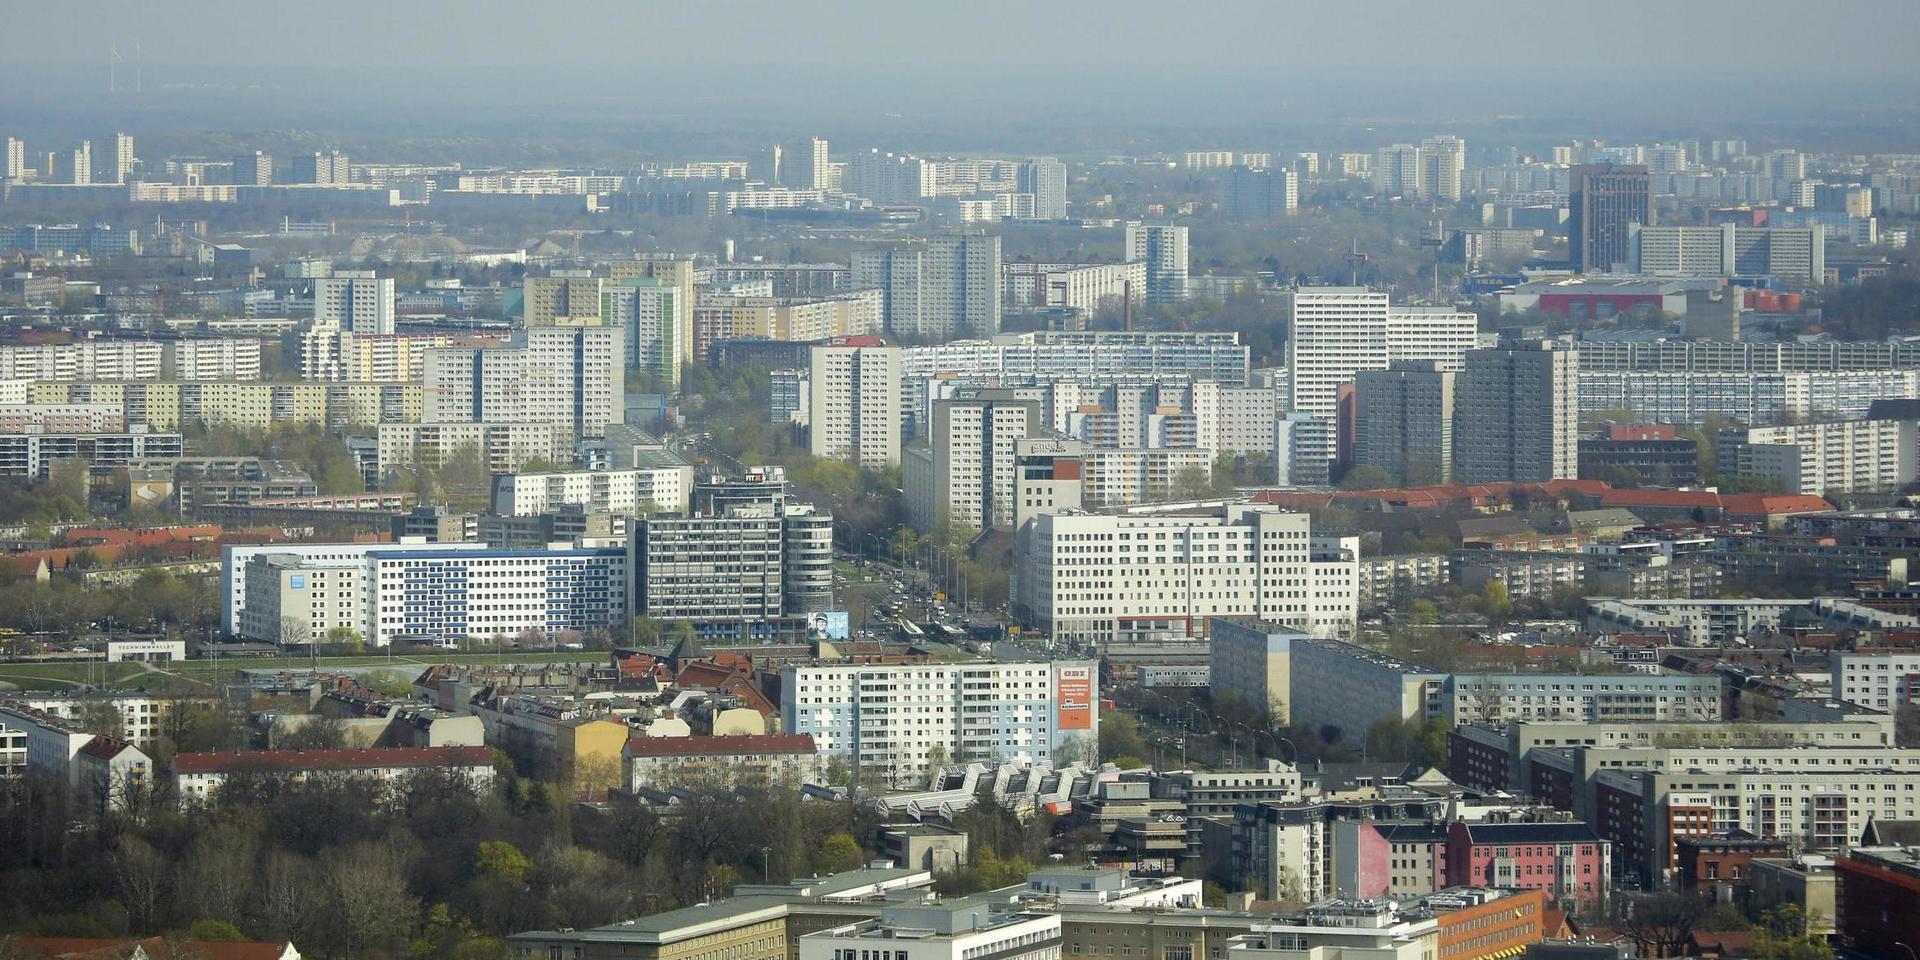 Apartment buildings in the former east part of the German capital photographed from the television tower in Berlin, Germany, Thursday, April 4, 2019. A campaign is being launched in the German capital to force the Berlin's state government into taking over nearly 250.000 apartments from corporate owners like Deutsche Wohnen and others. (AP Photo/Markus Schreiber)